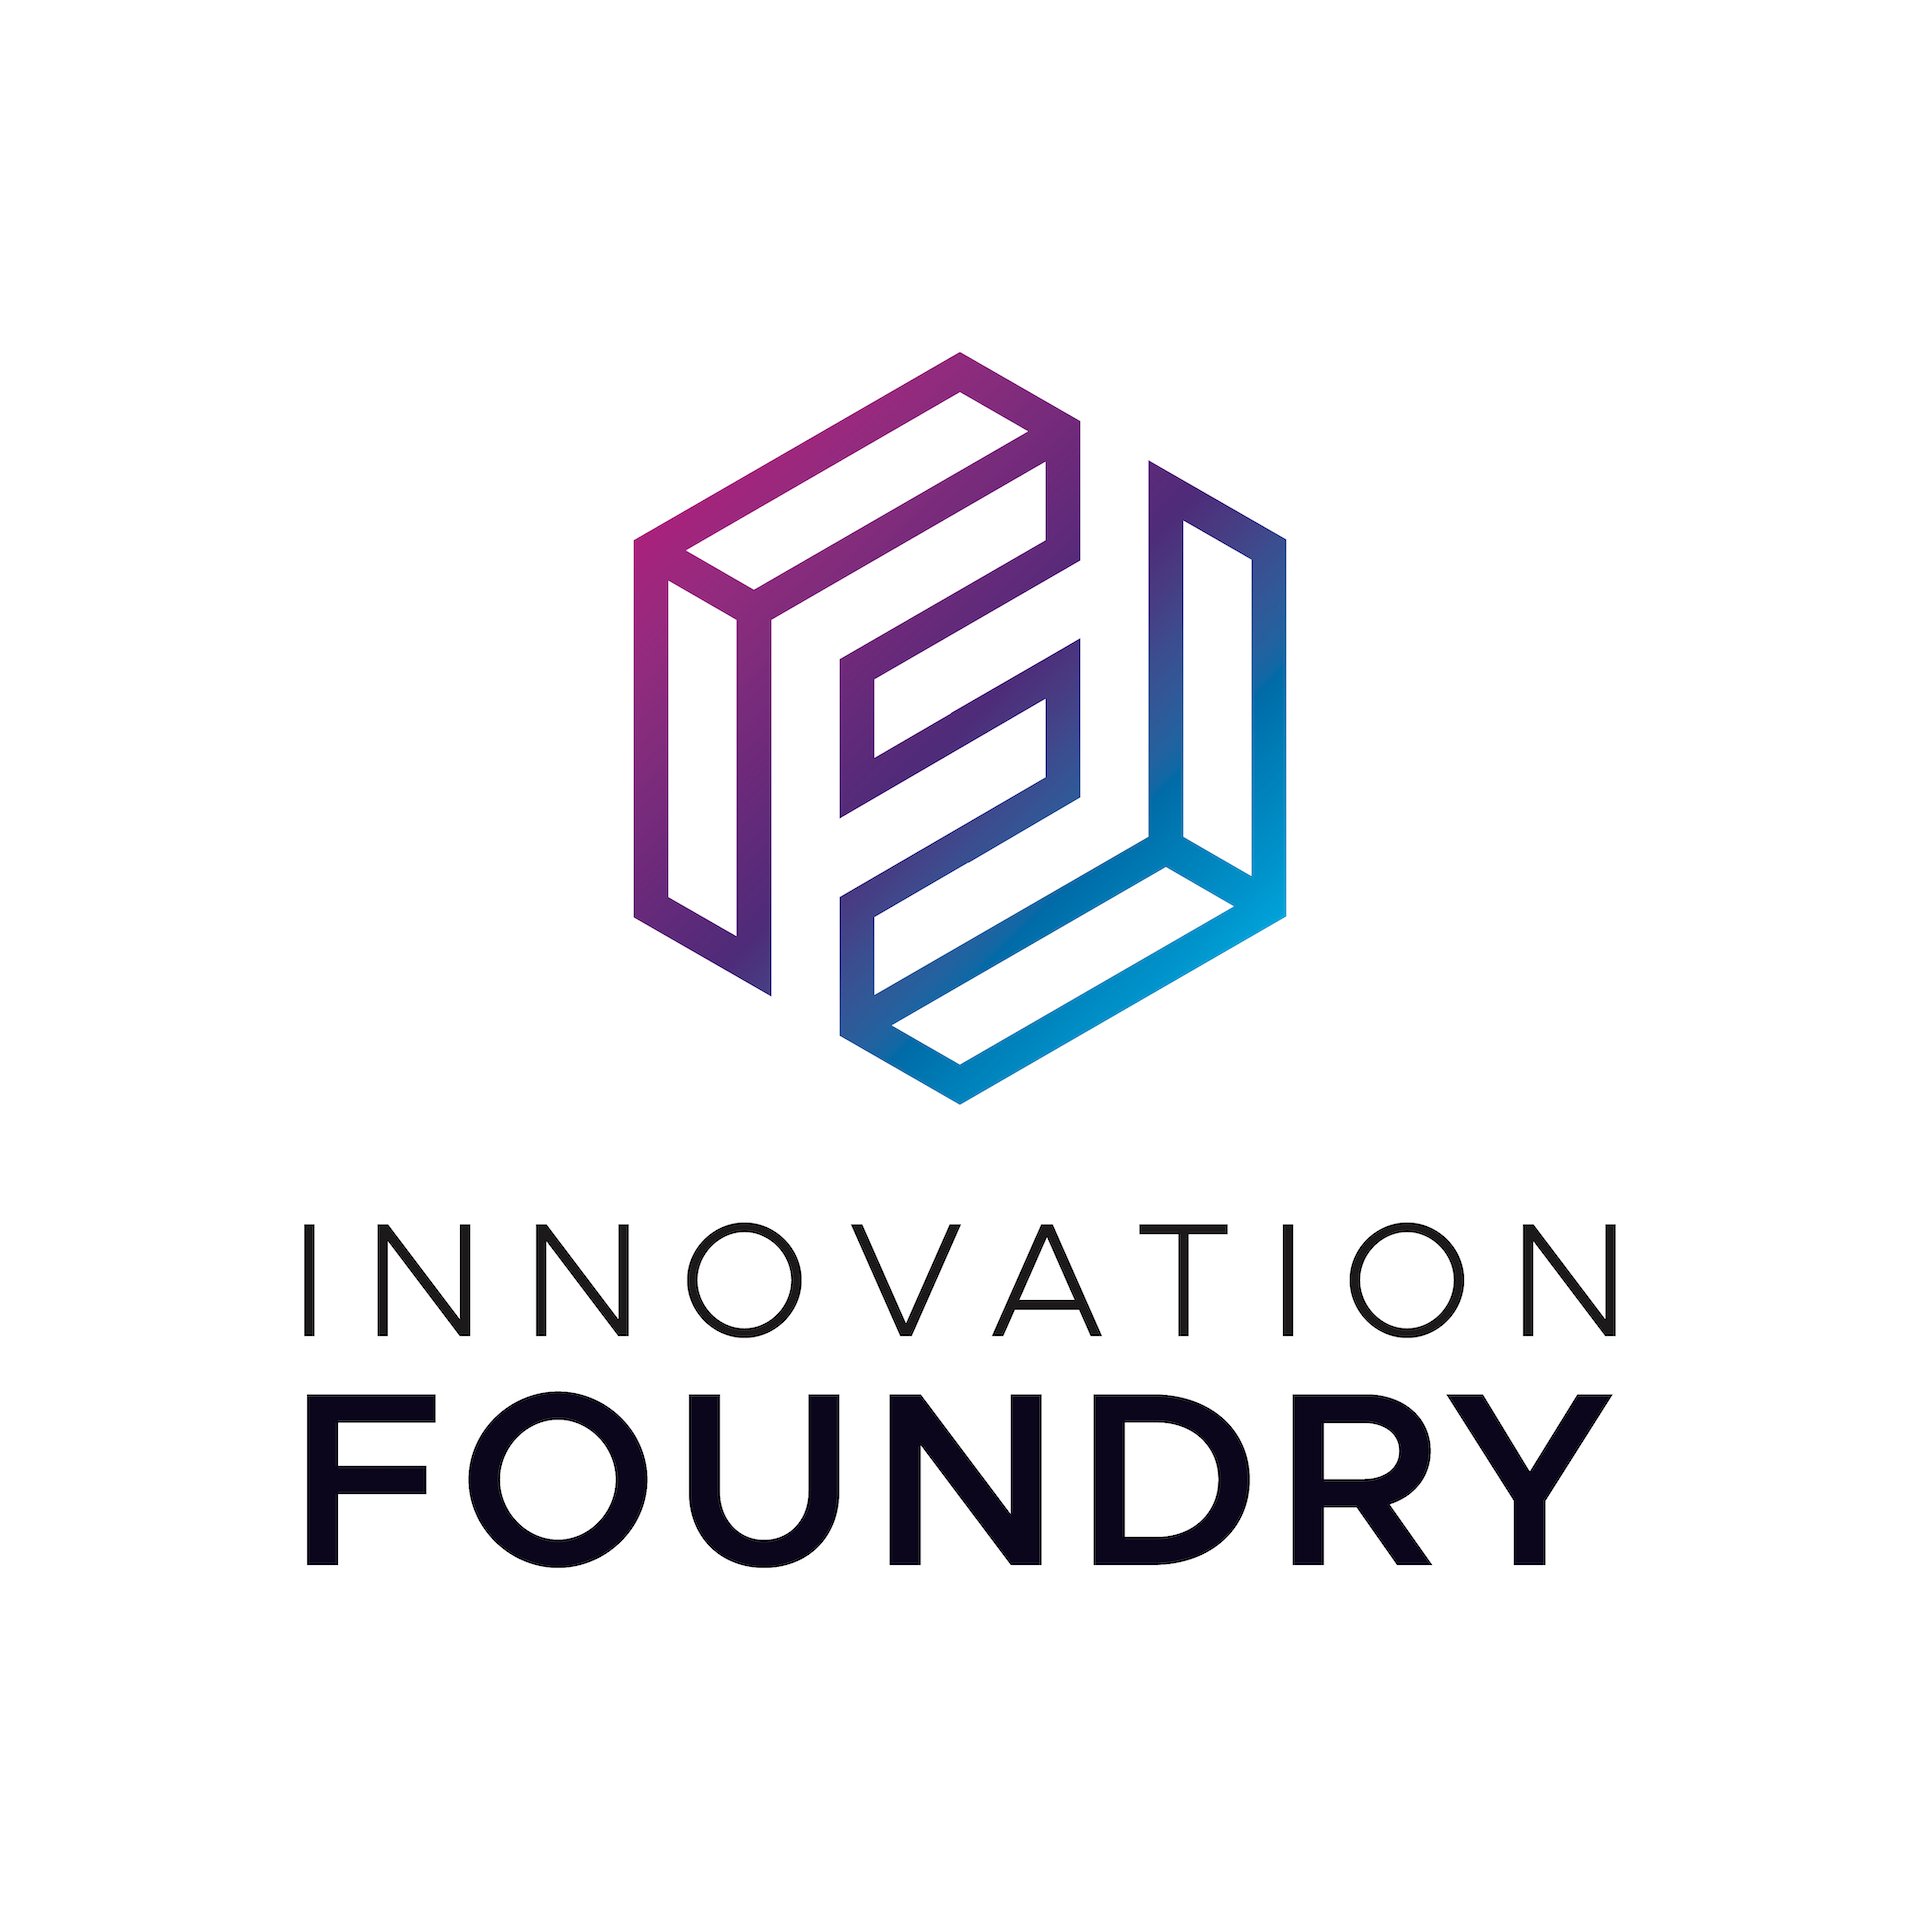 Innovation Foundry - logo is a geometric image on white background